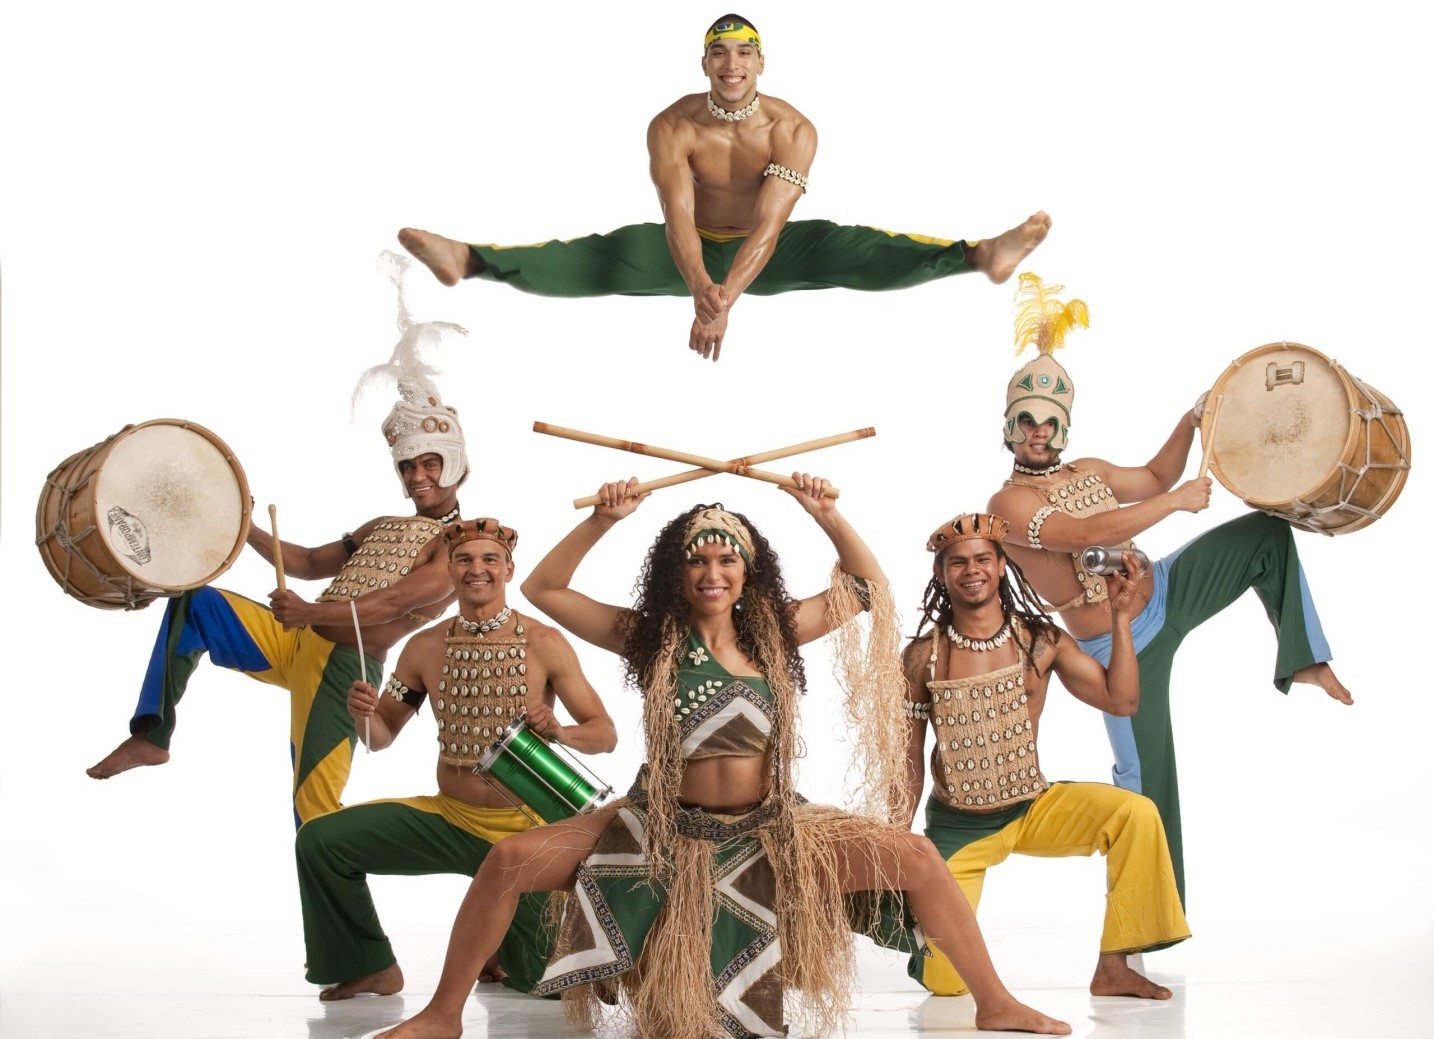 The image shows a group of people wearing Brazilian traditional costumes as part of a performance by Aché Brasil. The group combines music, dance, and Capoeira to create a vibrant and energetic show.